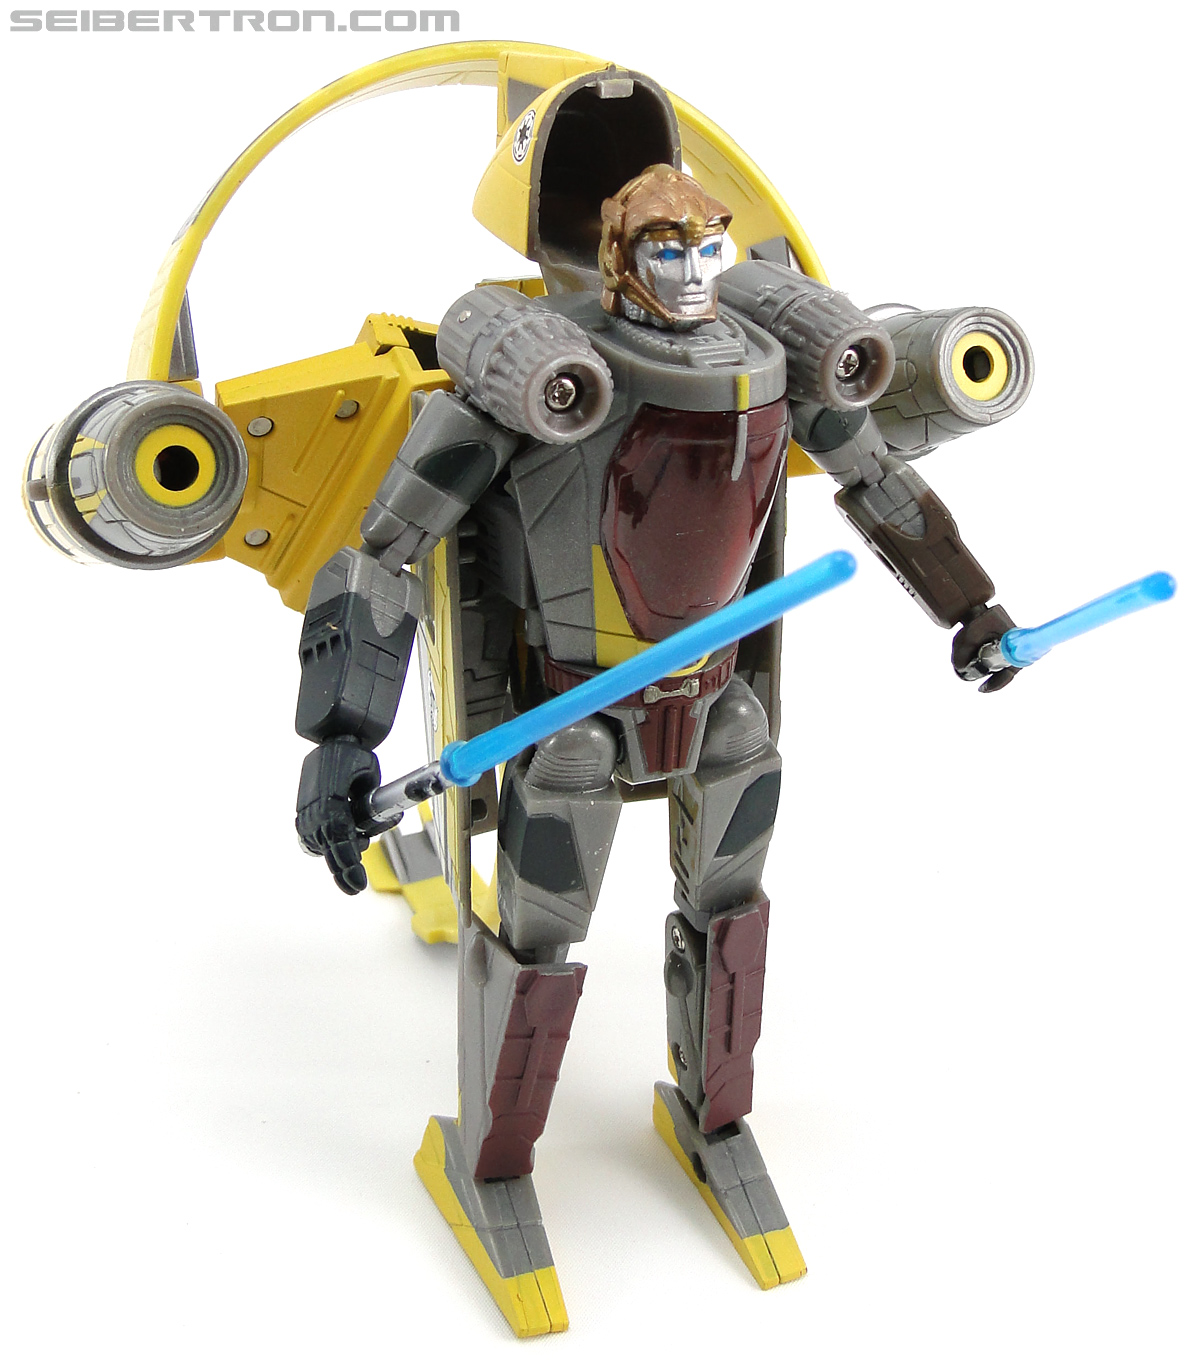 Star Wars Transformers Anakin Skywalker (Jedi Starfighter with Hyperspace Docking Ring) (Image #52 of 131)